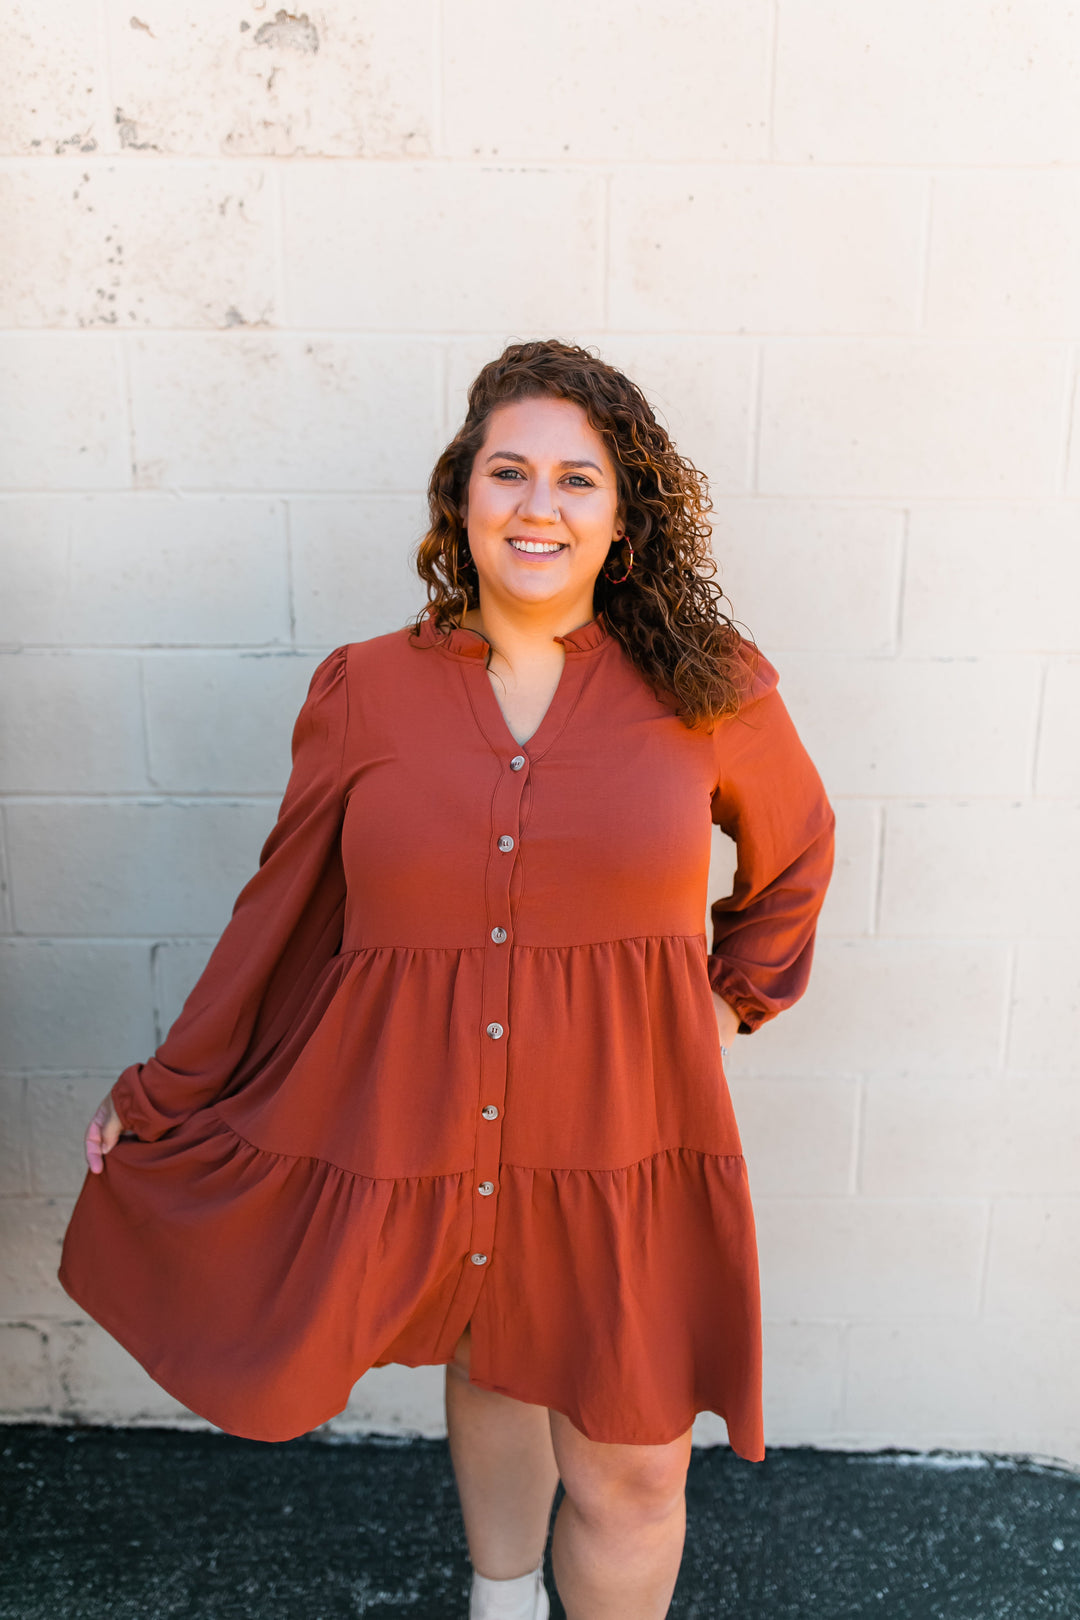 One Eleven Olive Boutique The Riley Button Up Dress (S-2XL) - Camel If you are in need of a flattering and easy throw together outfit, look no further than the Riley Button Up Dress! The color, the tiers, the buttons..the pockets! It